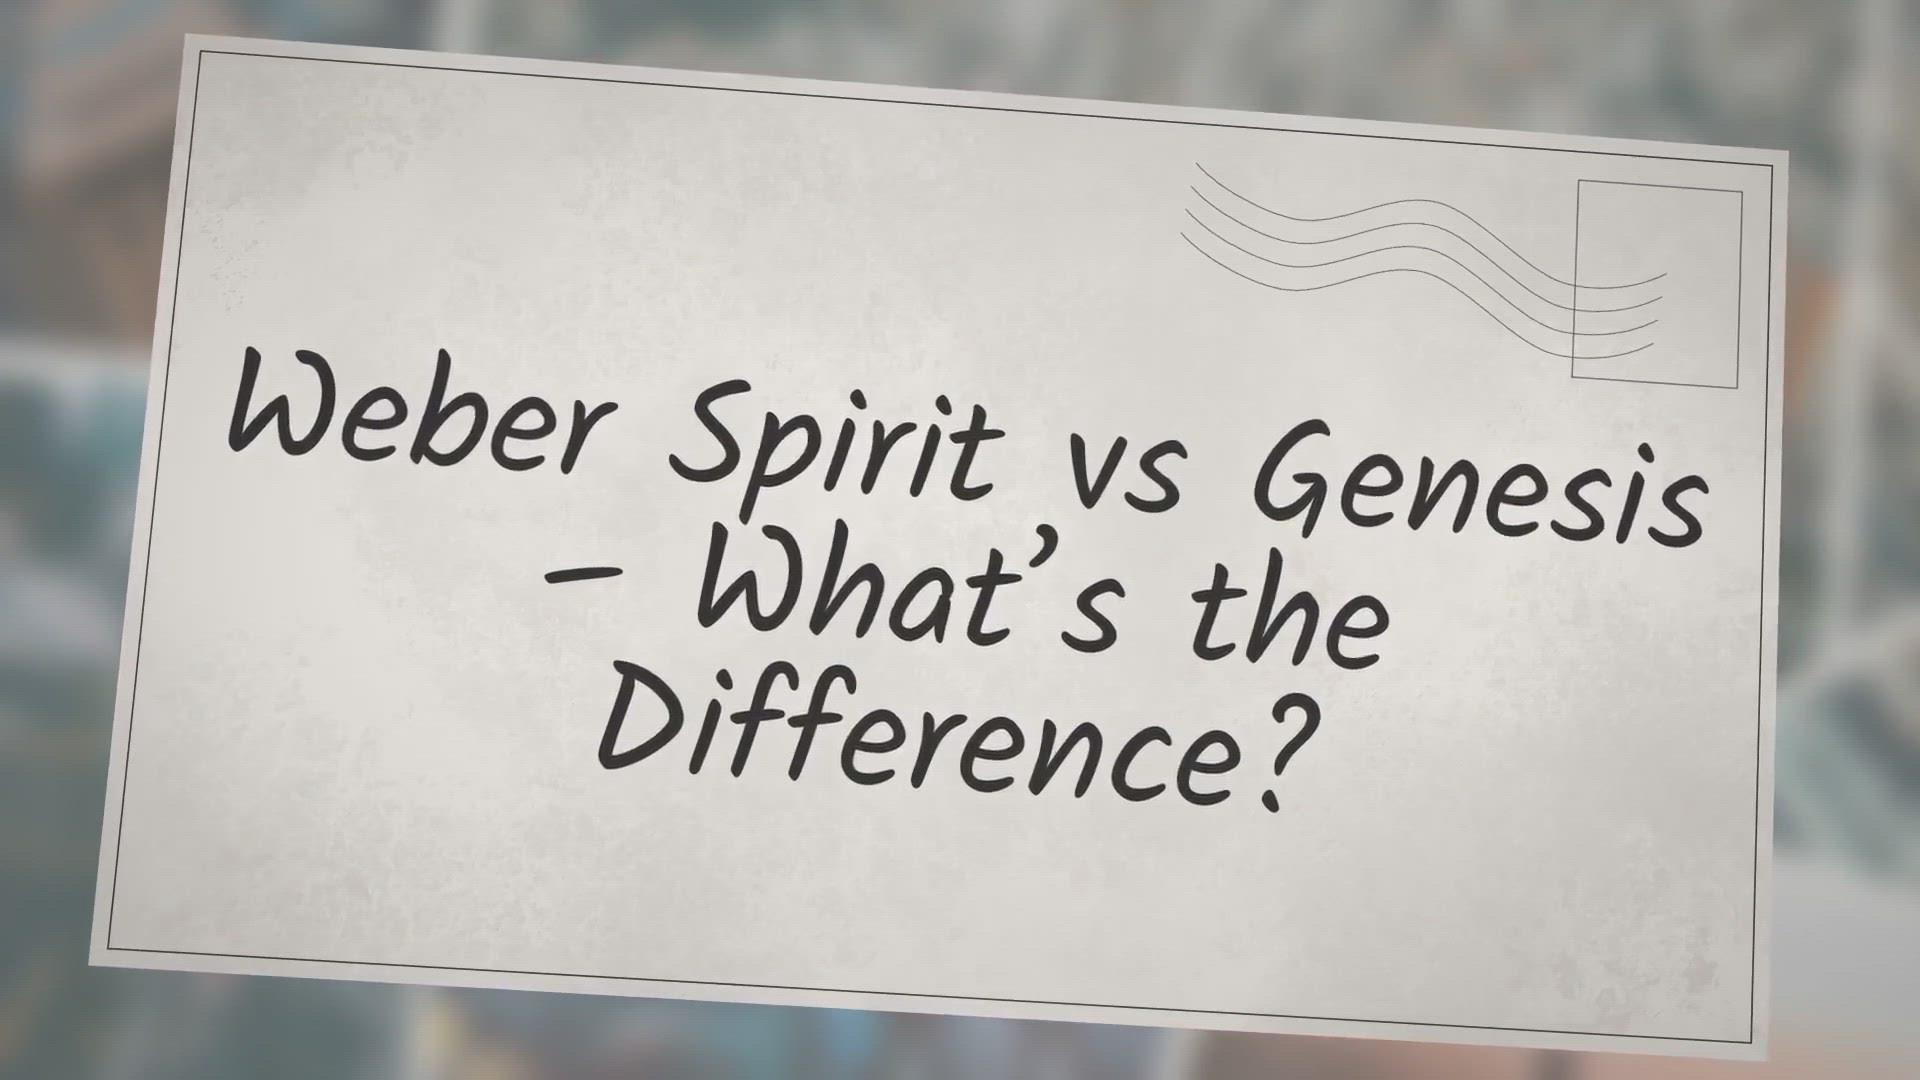 'Video thumbnail for Weber Spirit vs Genesis – What’s the Difference?'